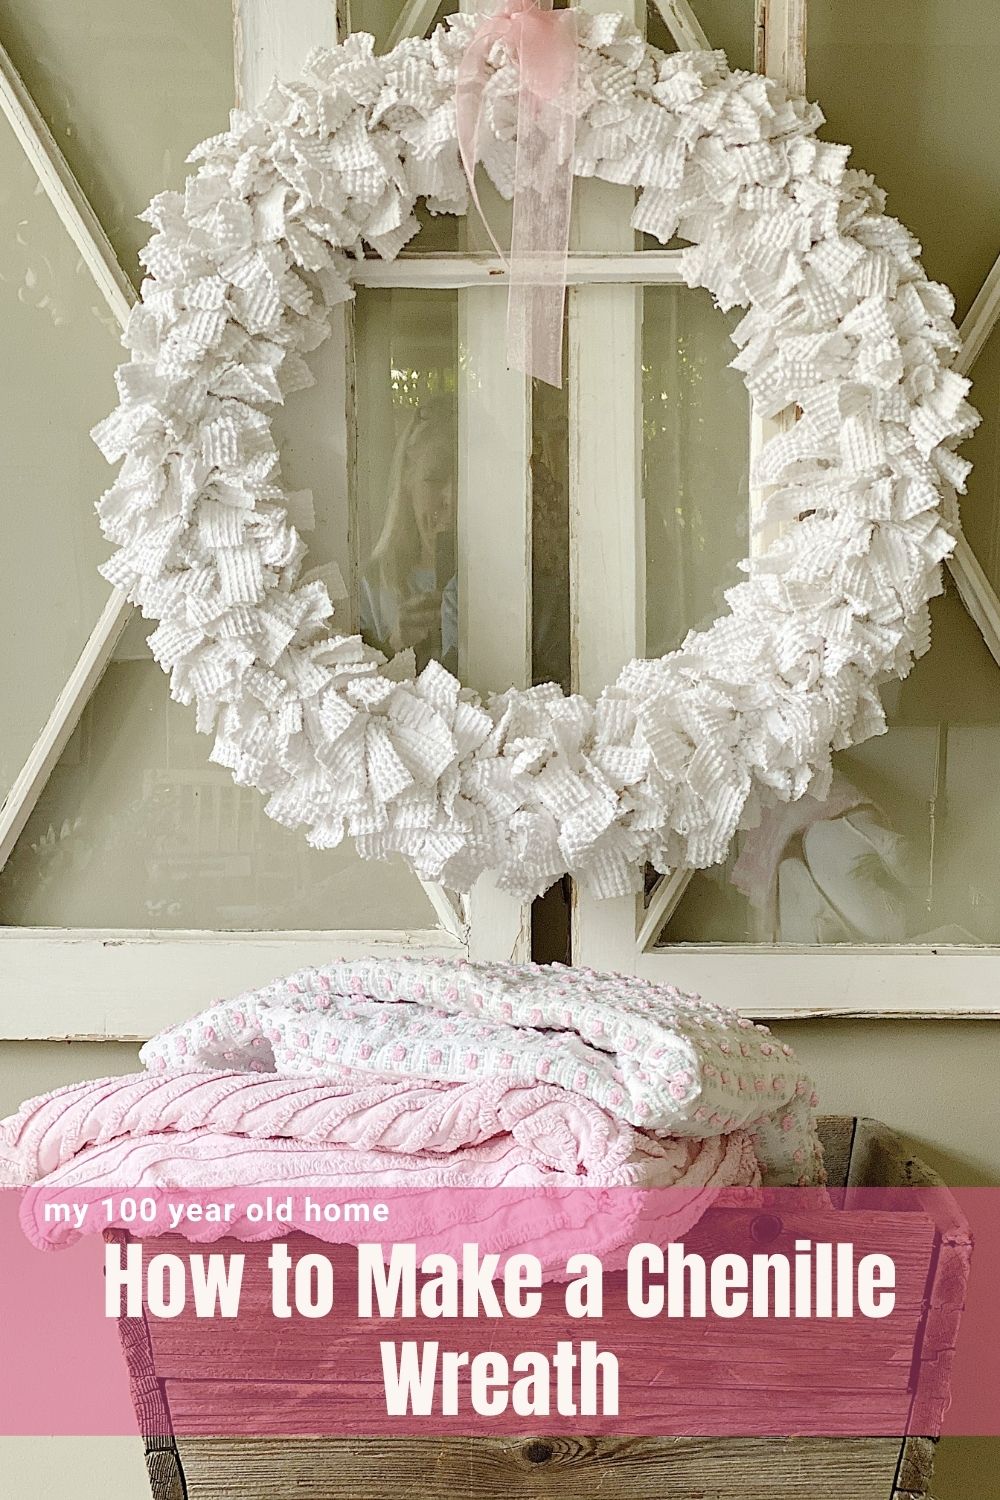 I love chenille and am thrilled to share how to make a chenille wreath. I am so happy I found a use for the $5 chenille bedspread I bought at the flea market.